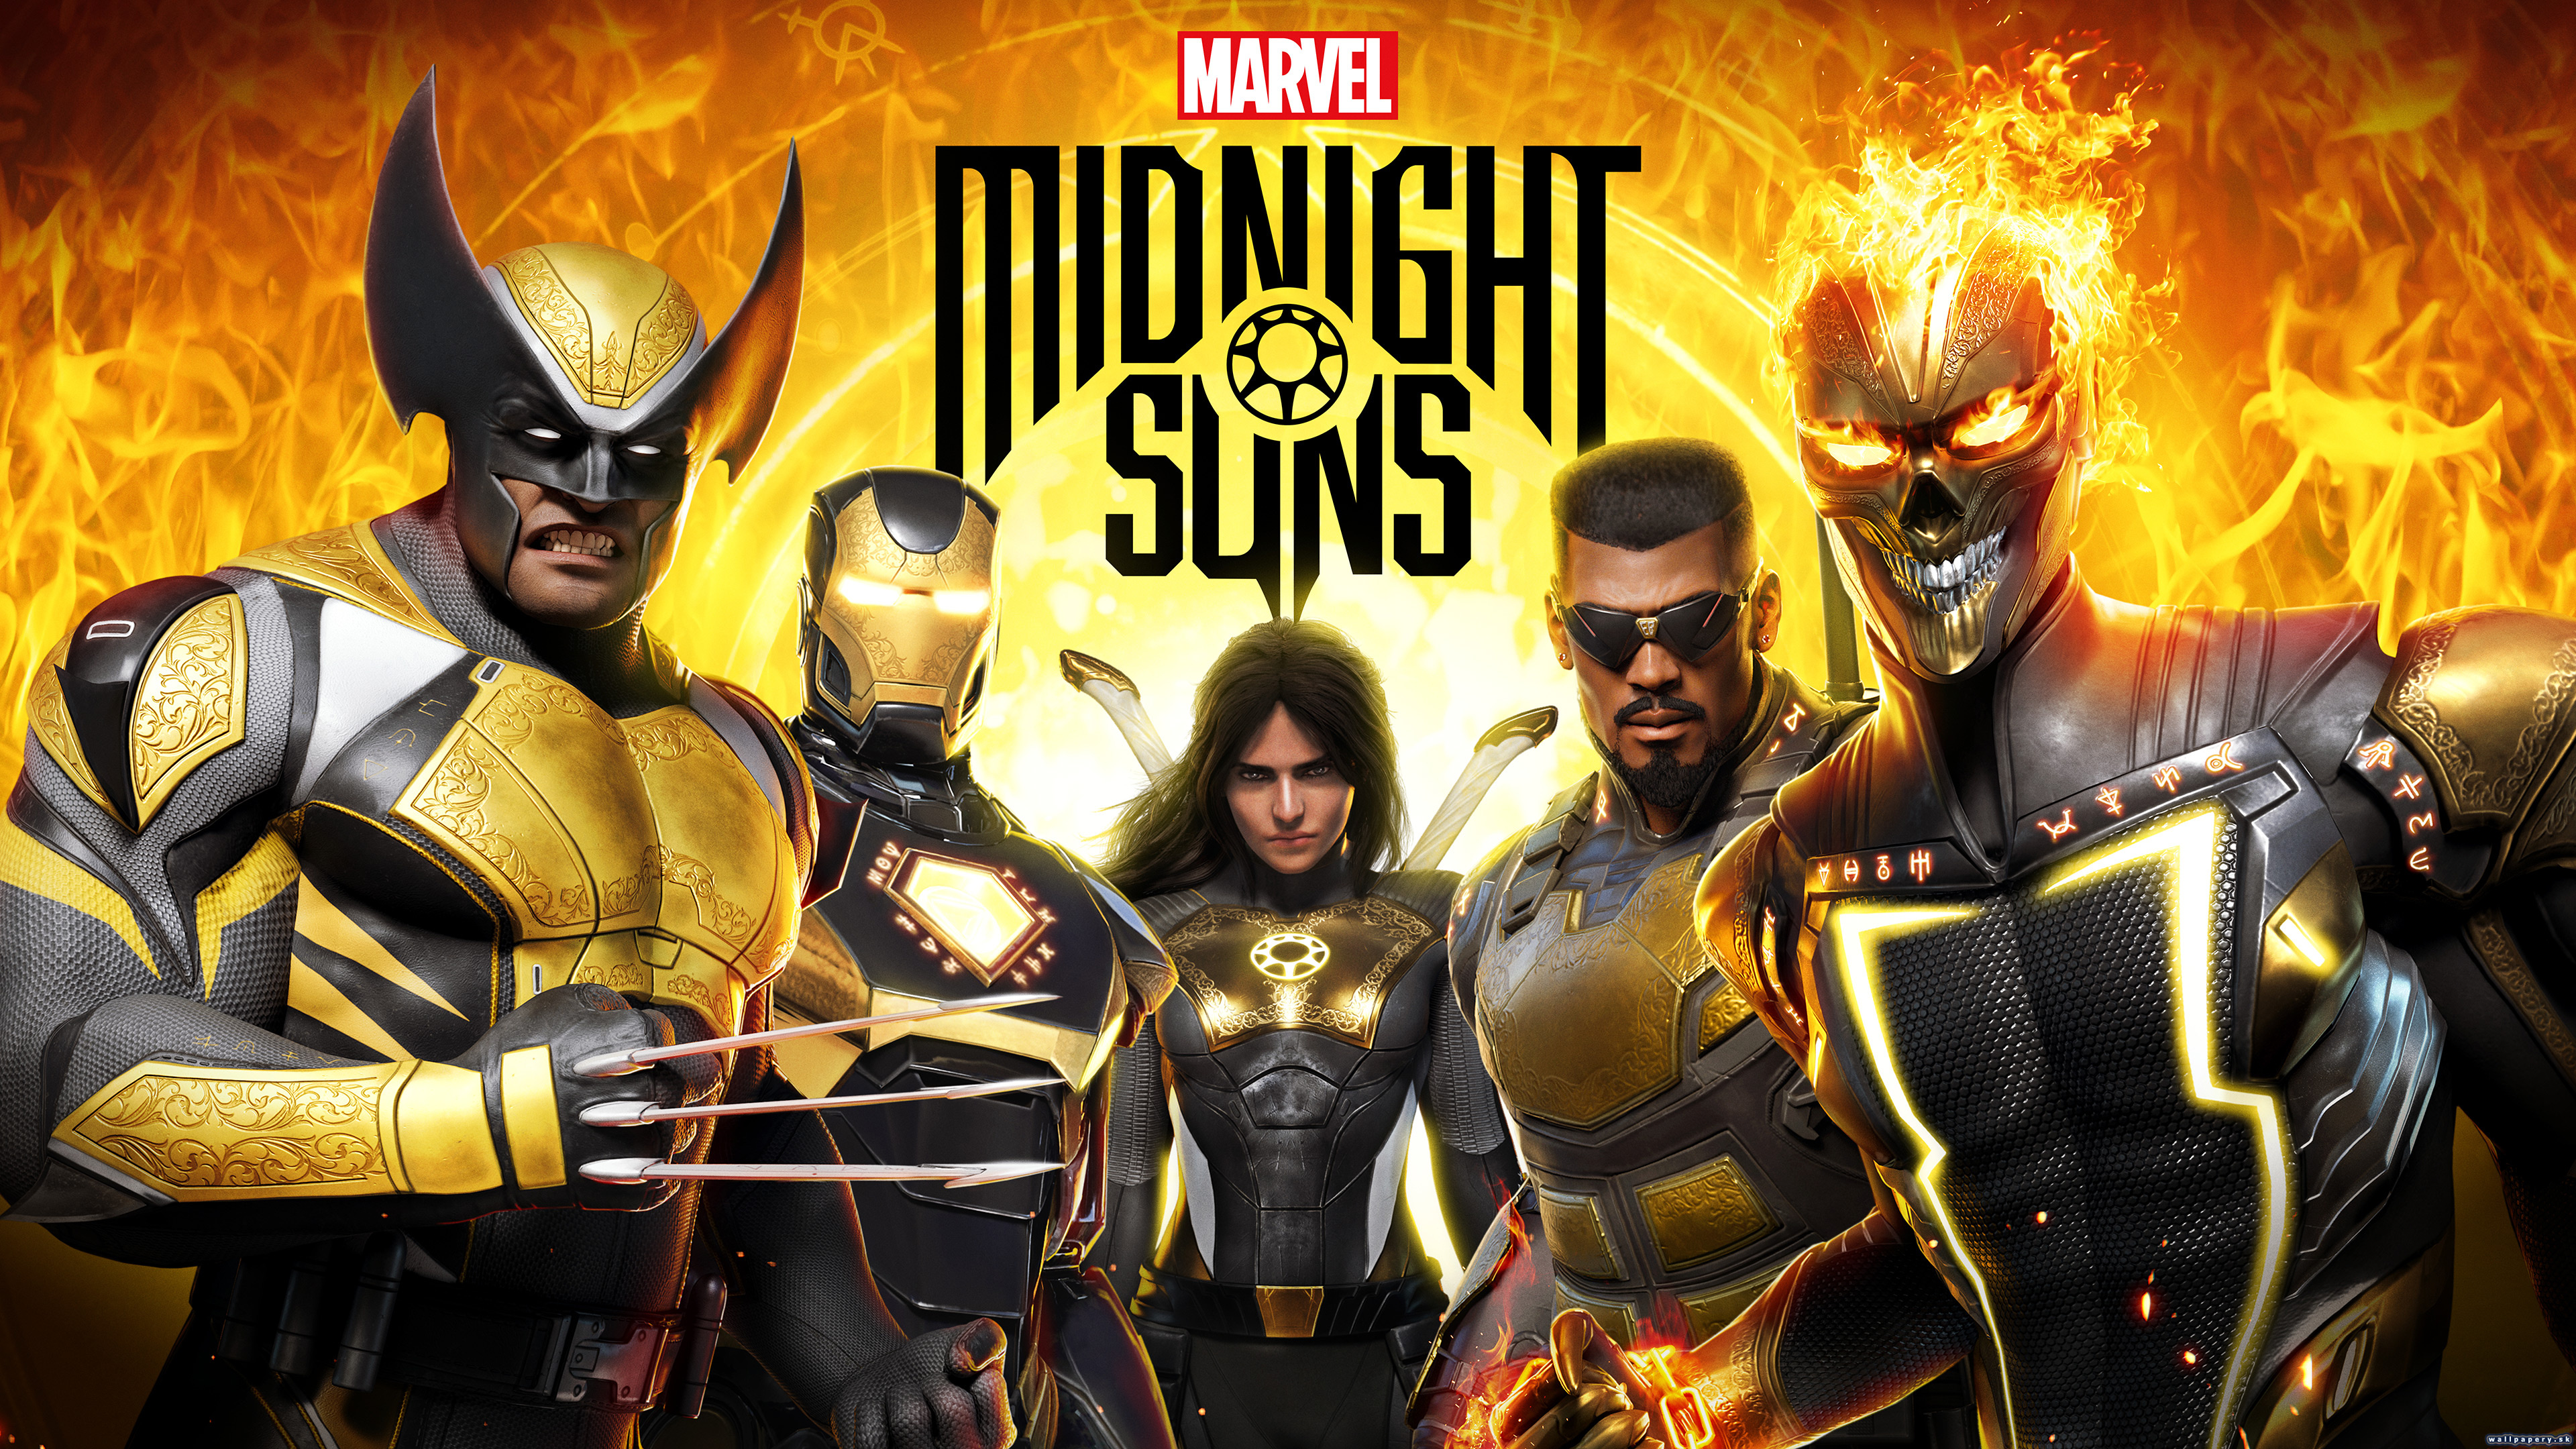 Marvel's Midnight Suns, HD wallpapers, Epic visuals, Gaming backgrounds, 3840x2160 4K Desktop